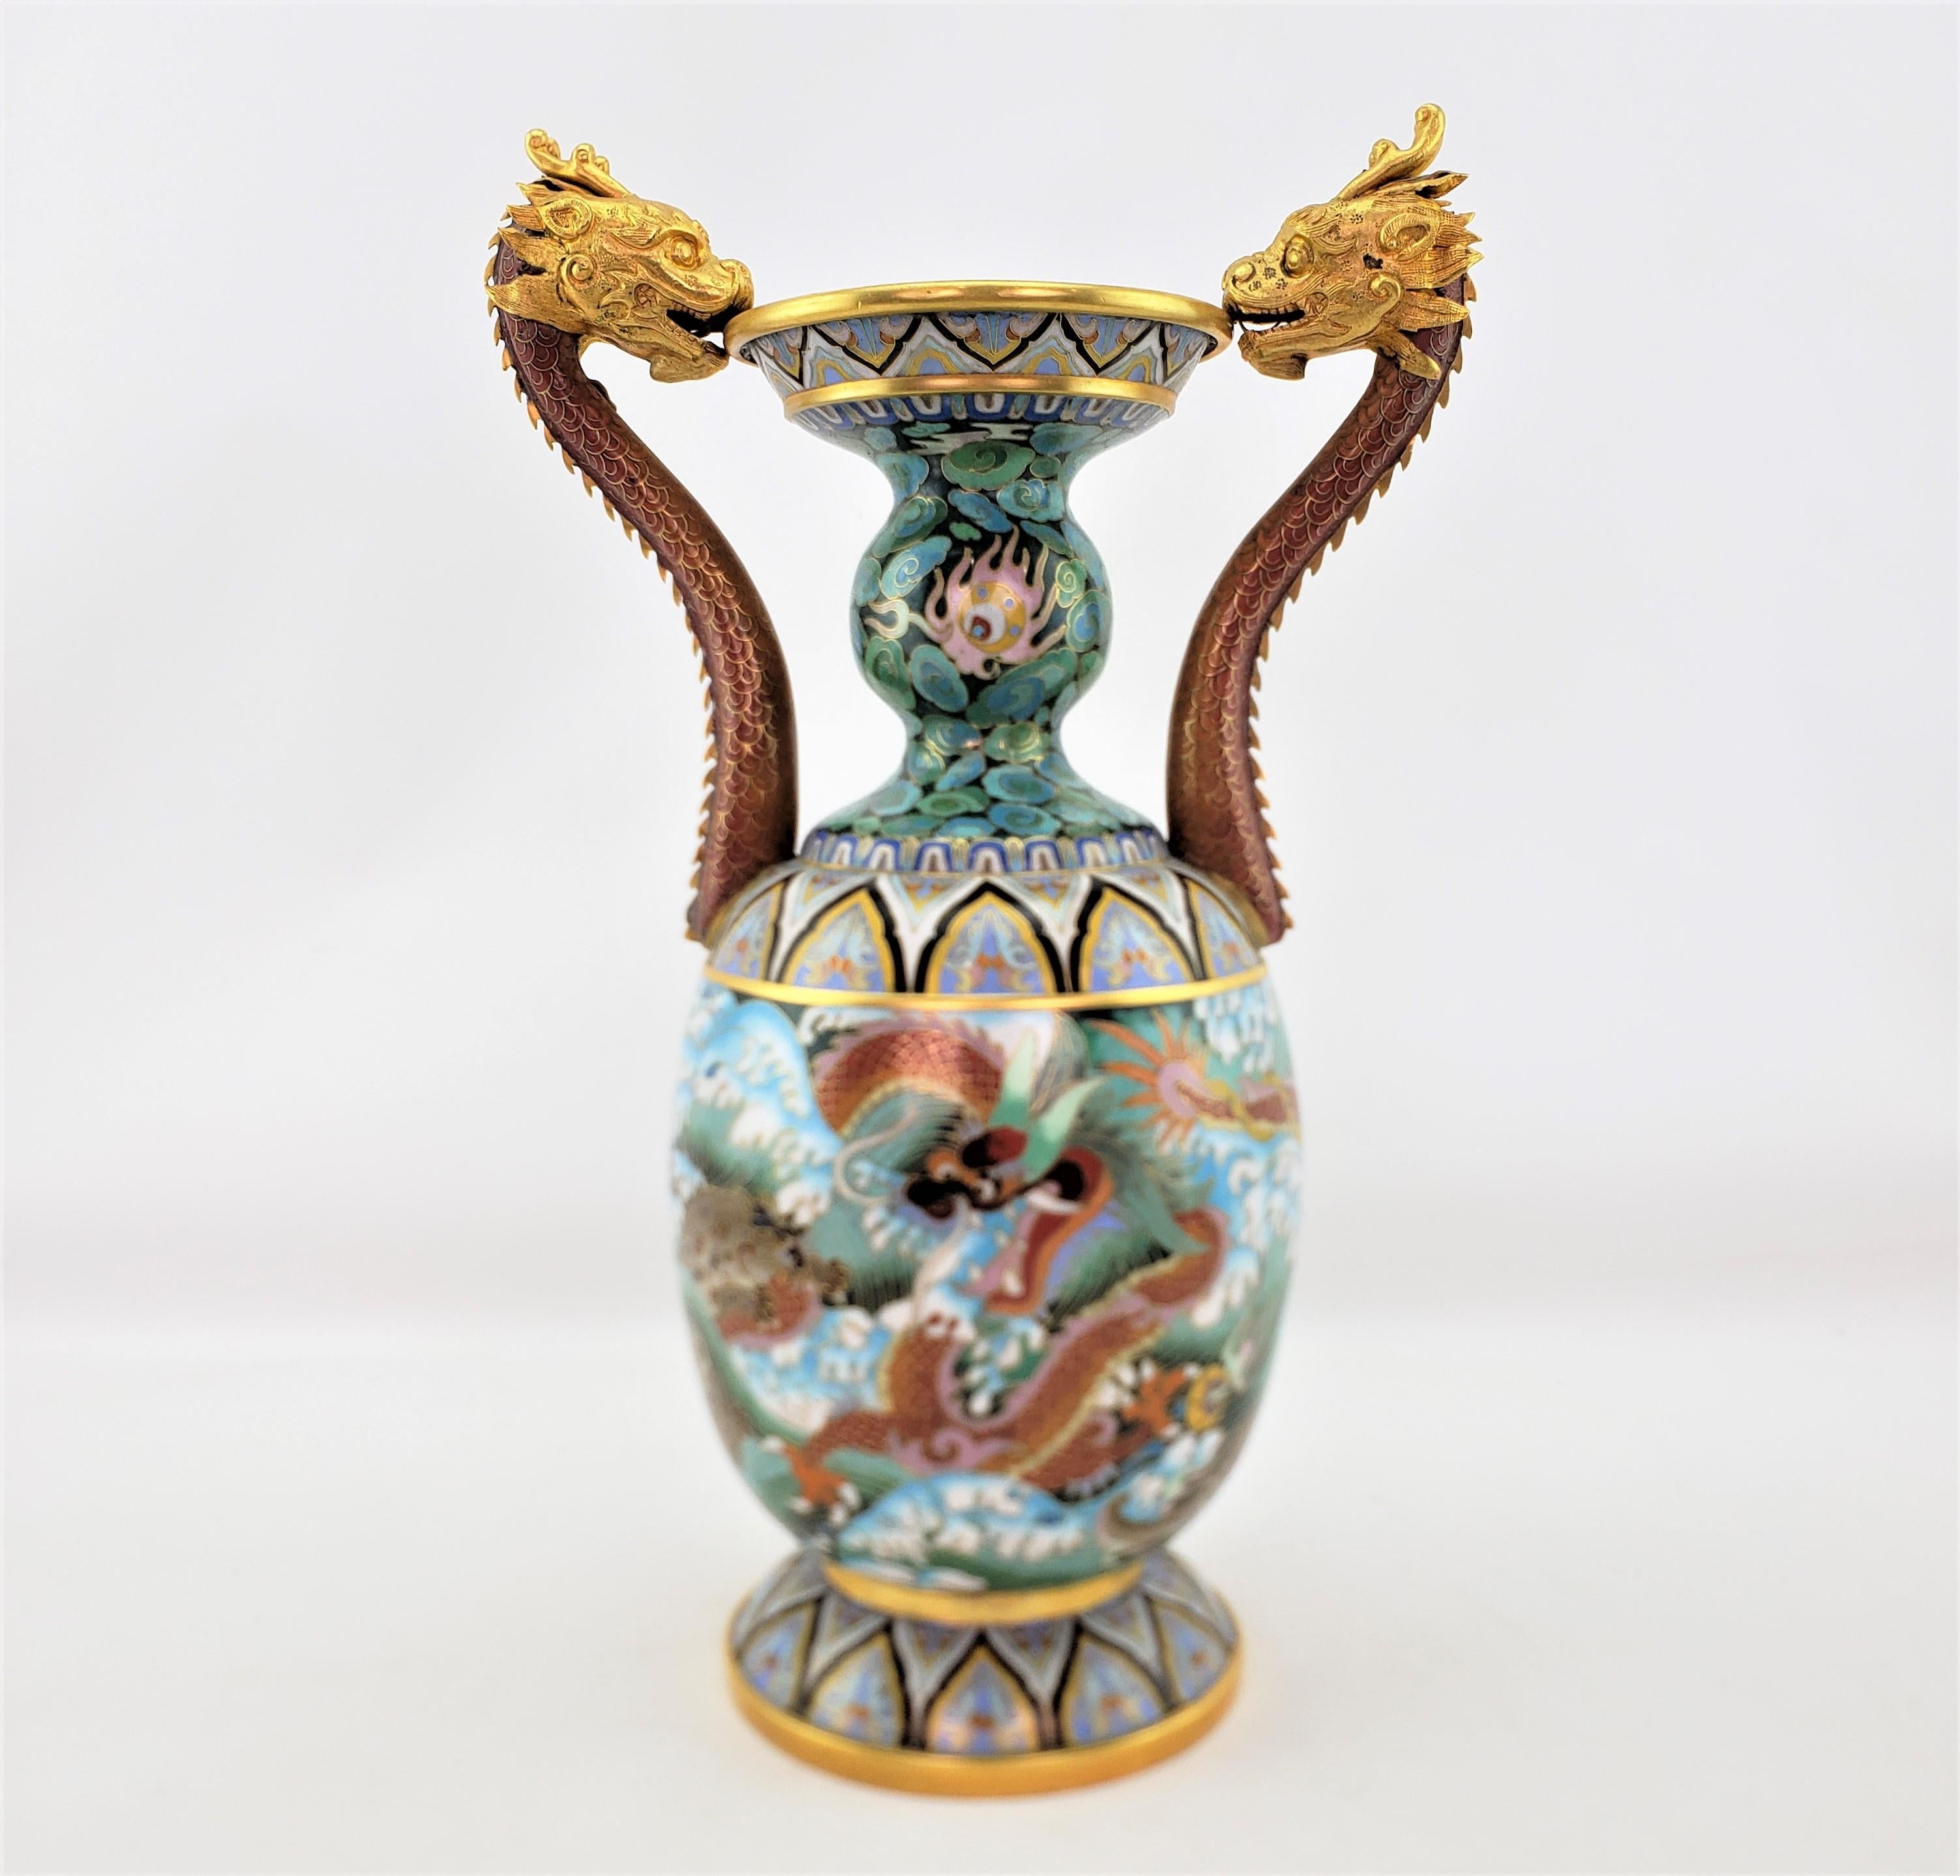 Brass Large Vintage Decorative Chinese Cloissone Vase with Imperial Dragon Handles For Sale